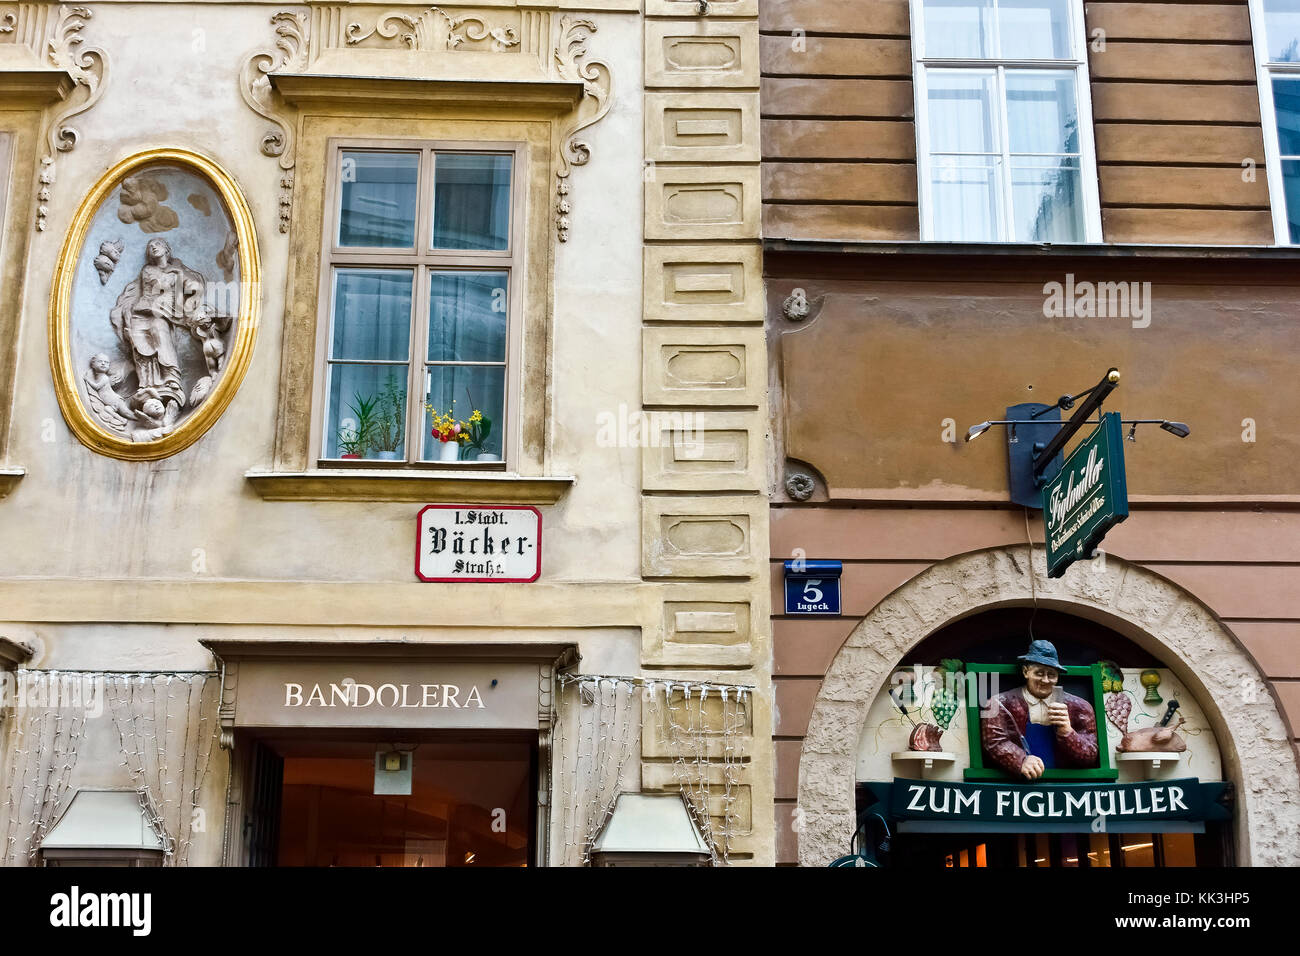 Figlmuller traditional Viennese restaurant. The most famous schnitzel restaurant in Vienna, Austria. Wall ceramics advertising sign over the entrance. Stock Photo